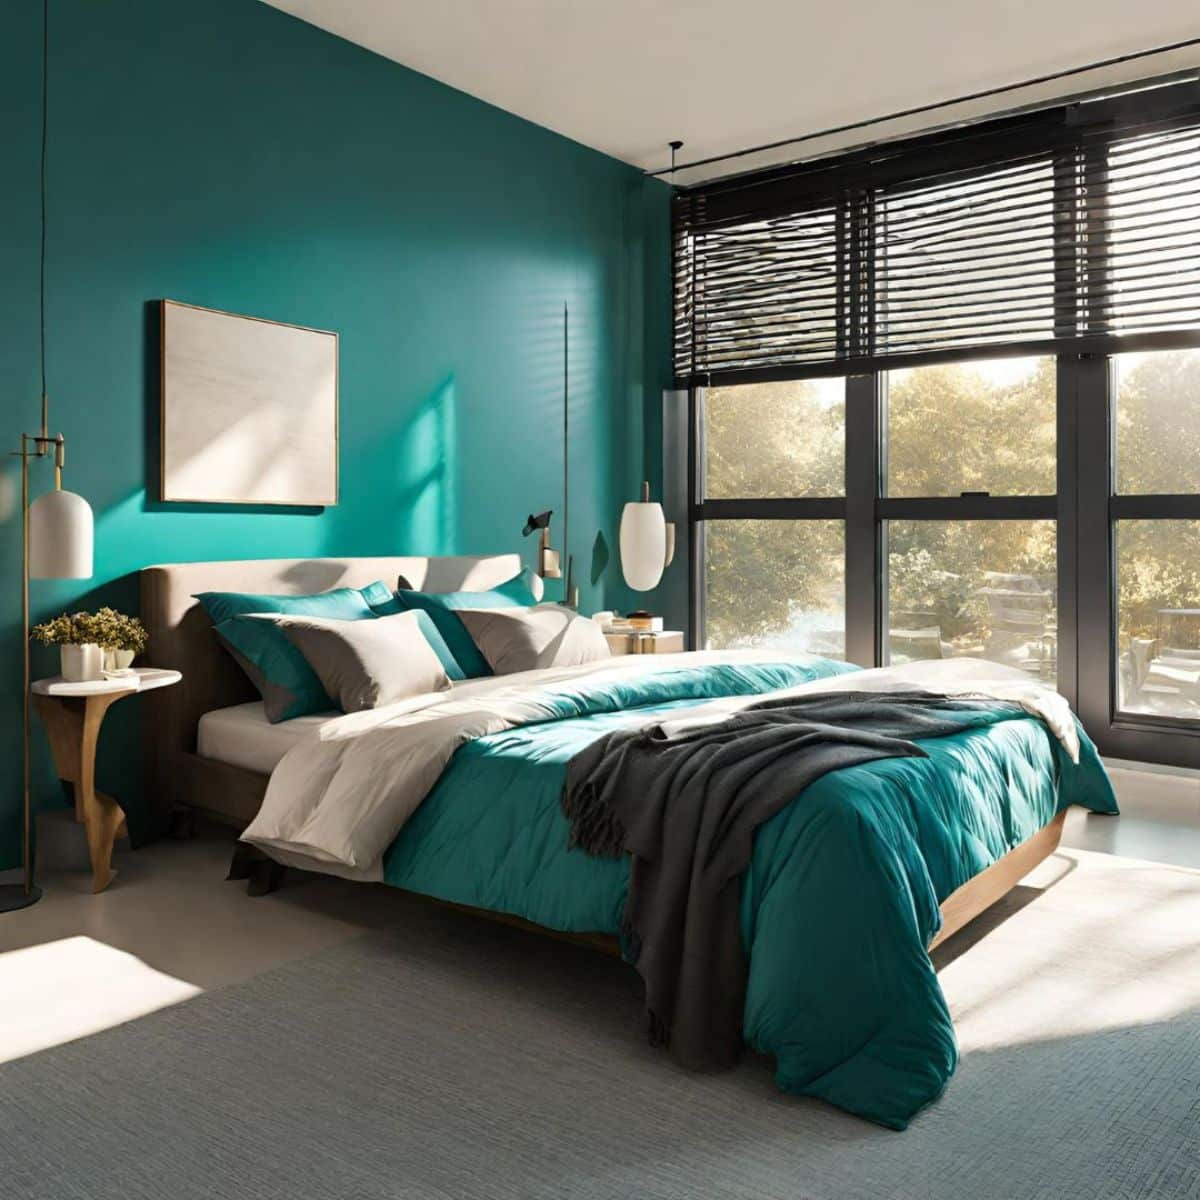 a teal bedroom beside a window with the sun shining through